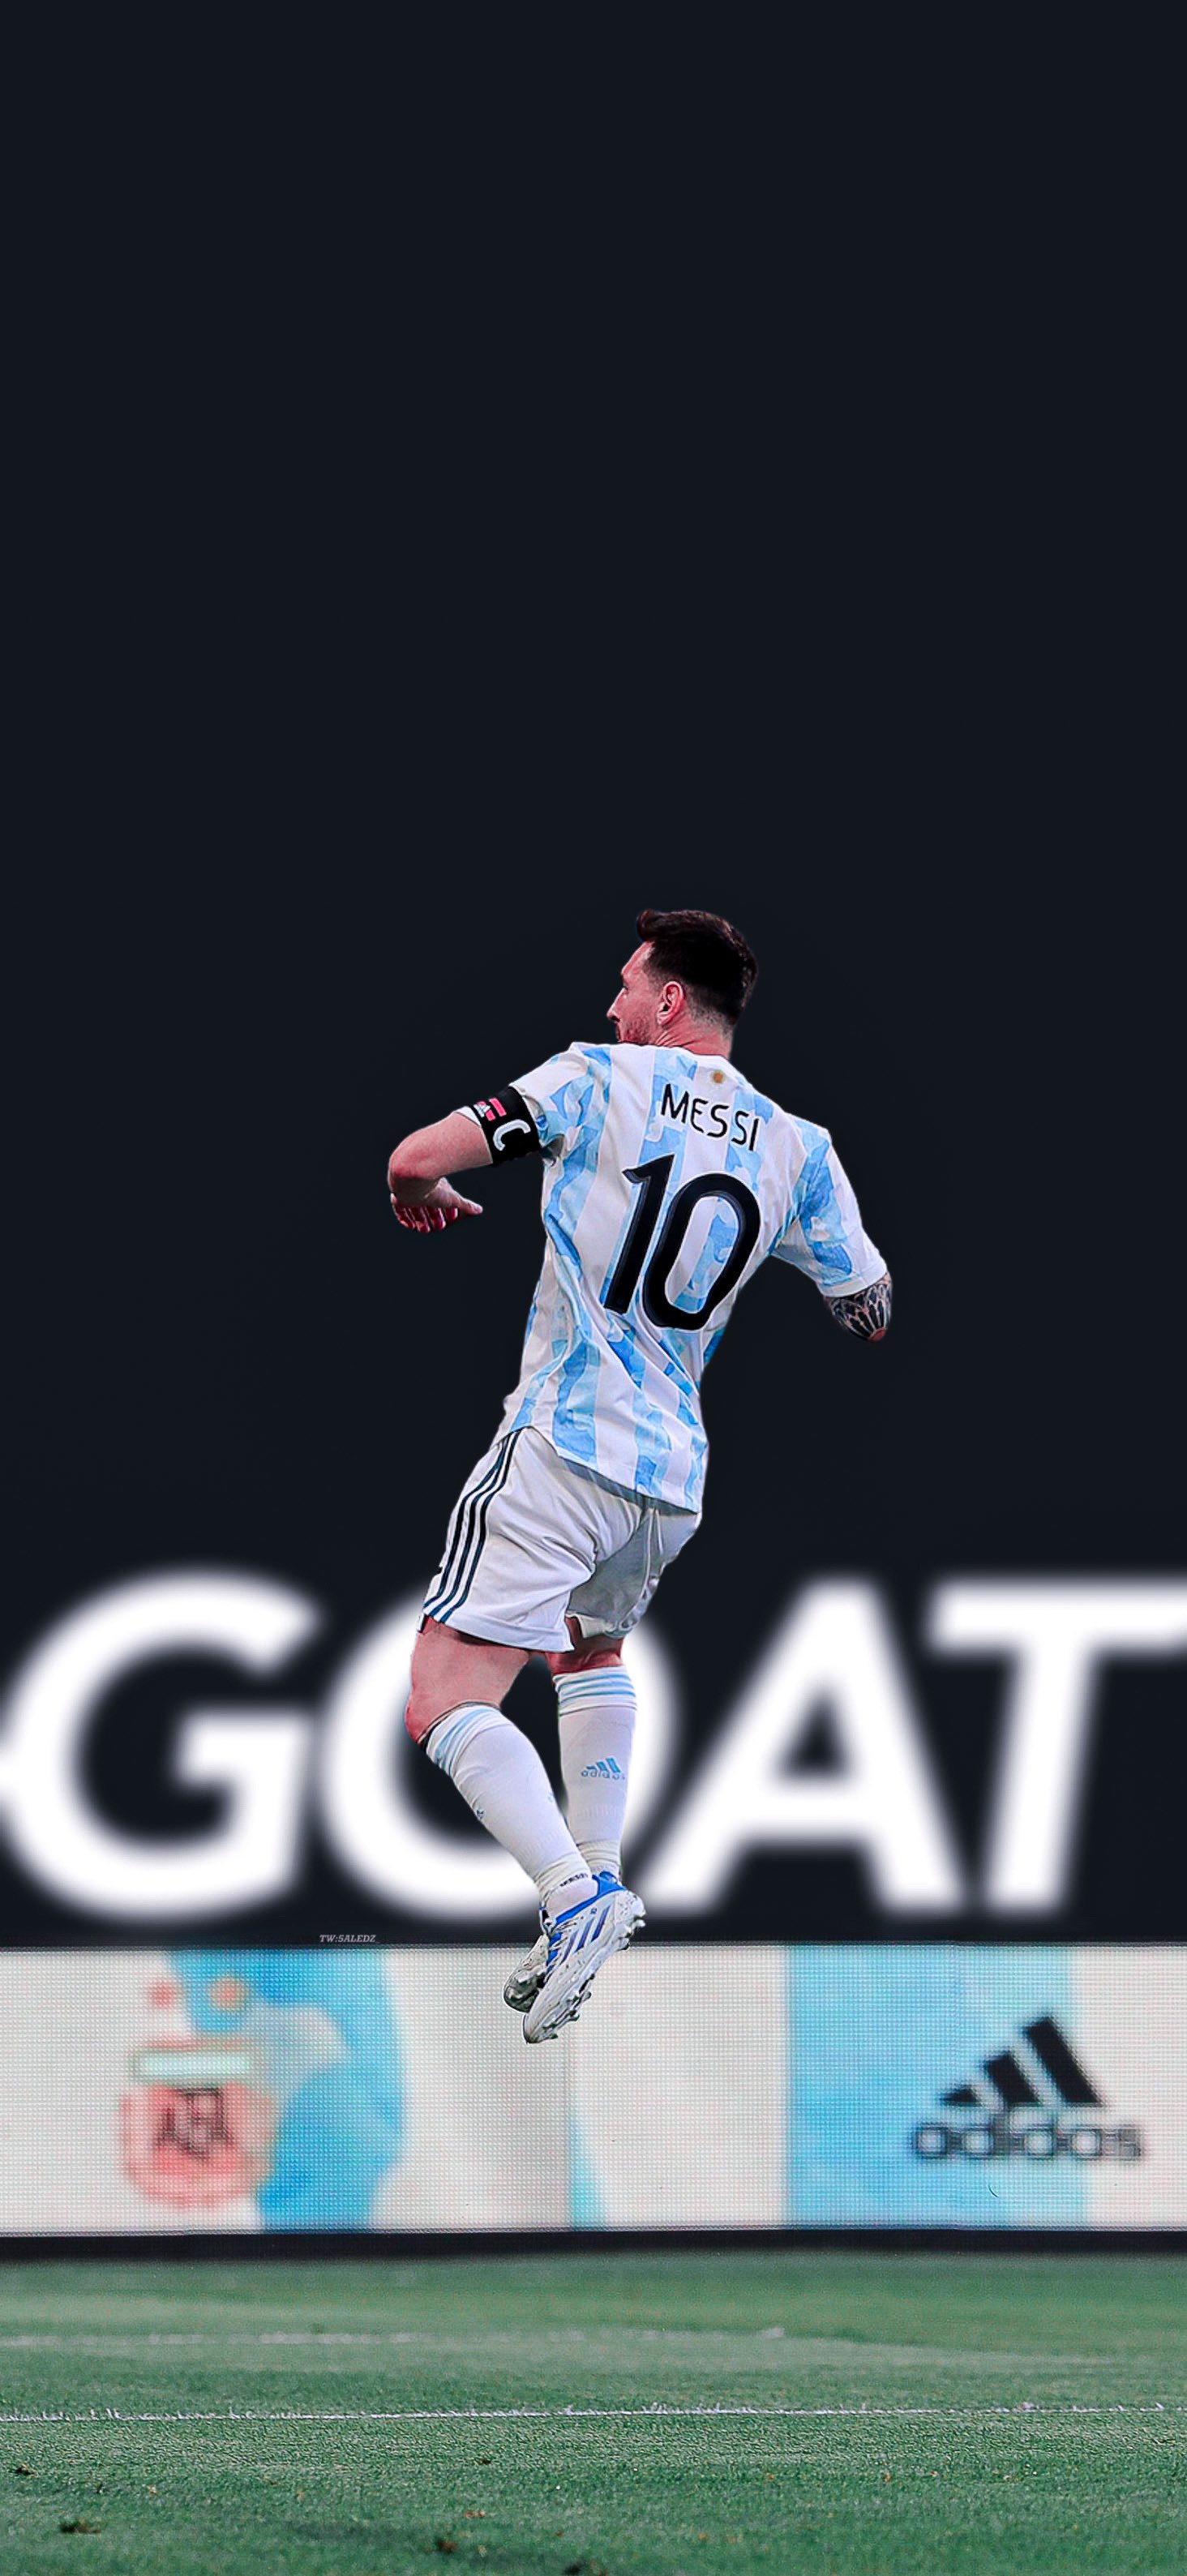 Messi World Cup 2022 Qatar Wallpaper for phone